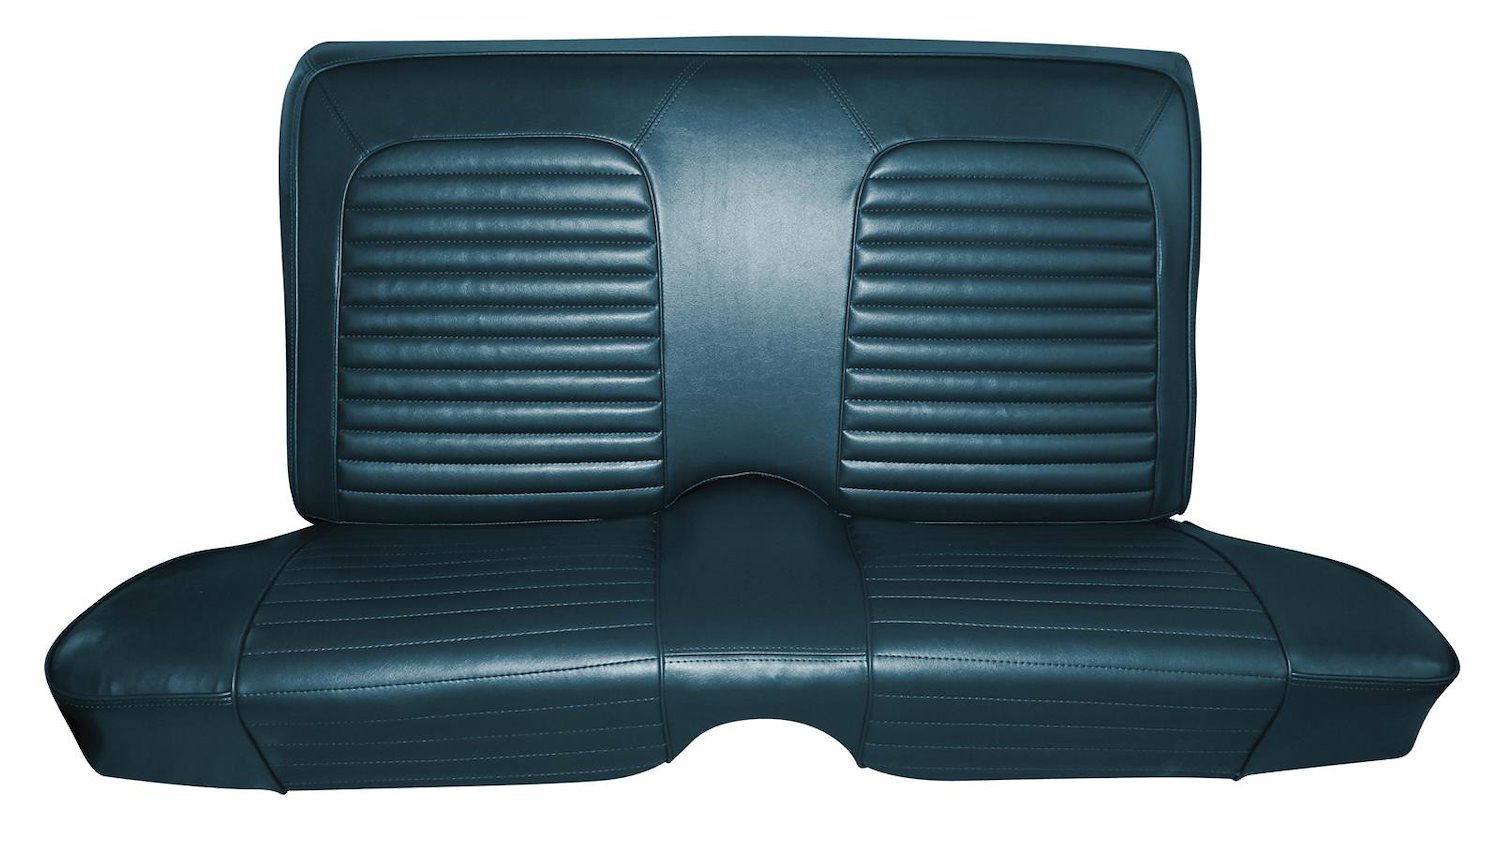 1965 Ford Falcon Futura Convertible Interior Two-Tone Rear Bench Seat Upholstery Set